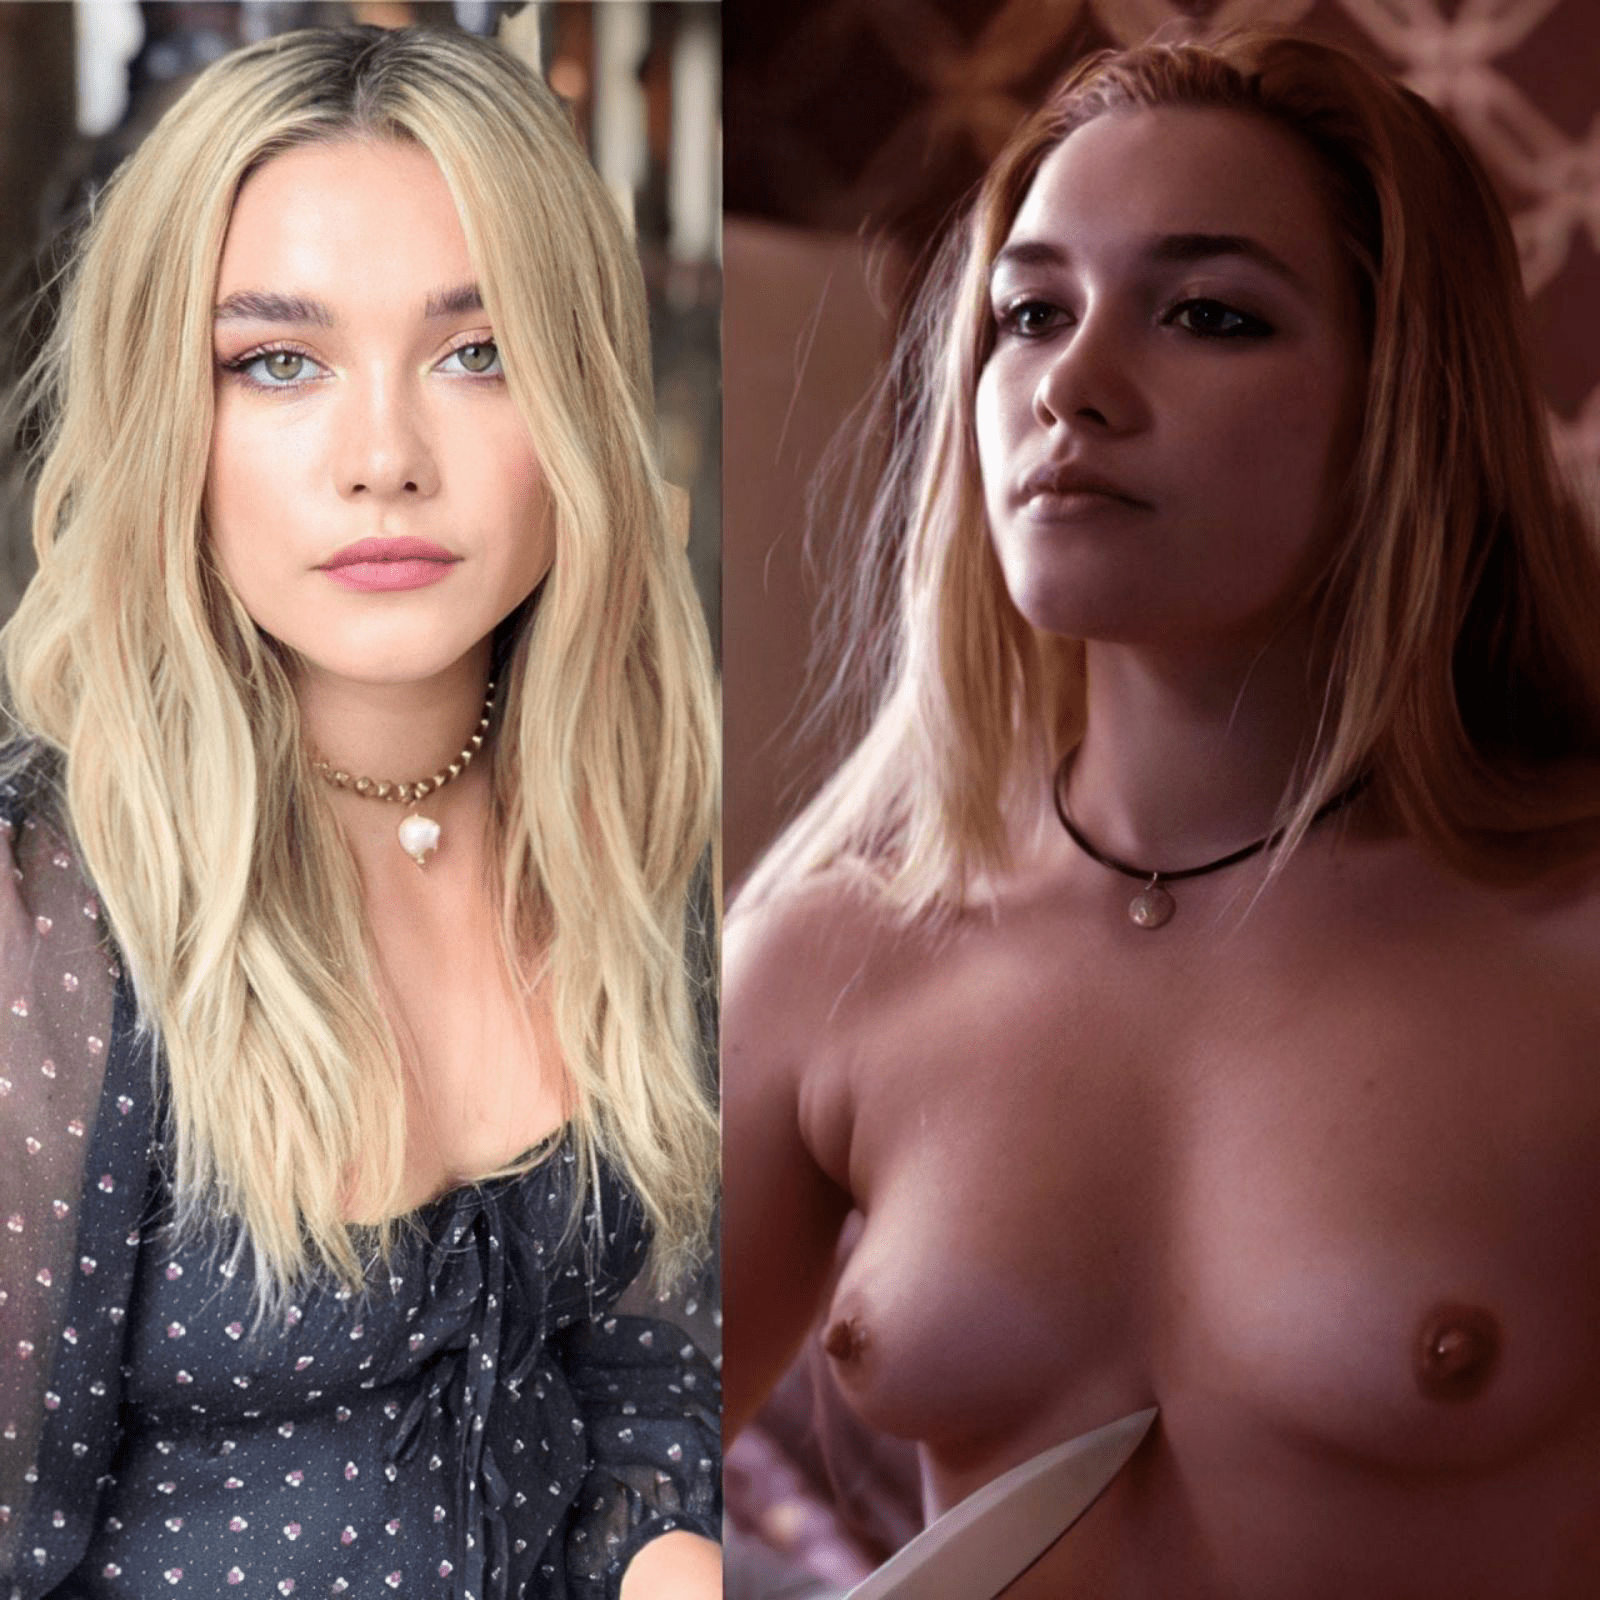 Florence Pugh On and off